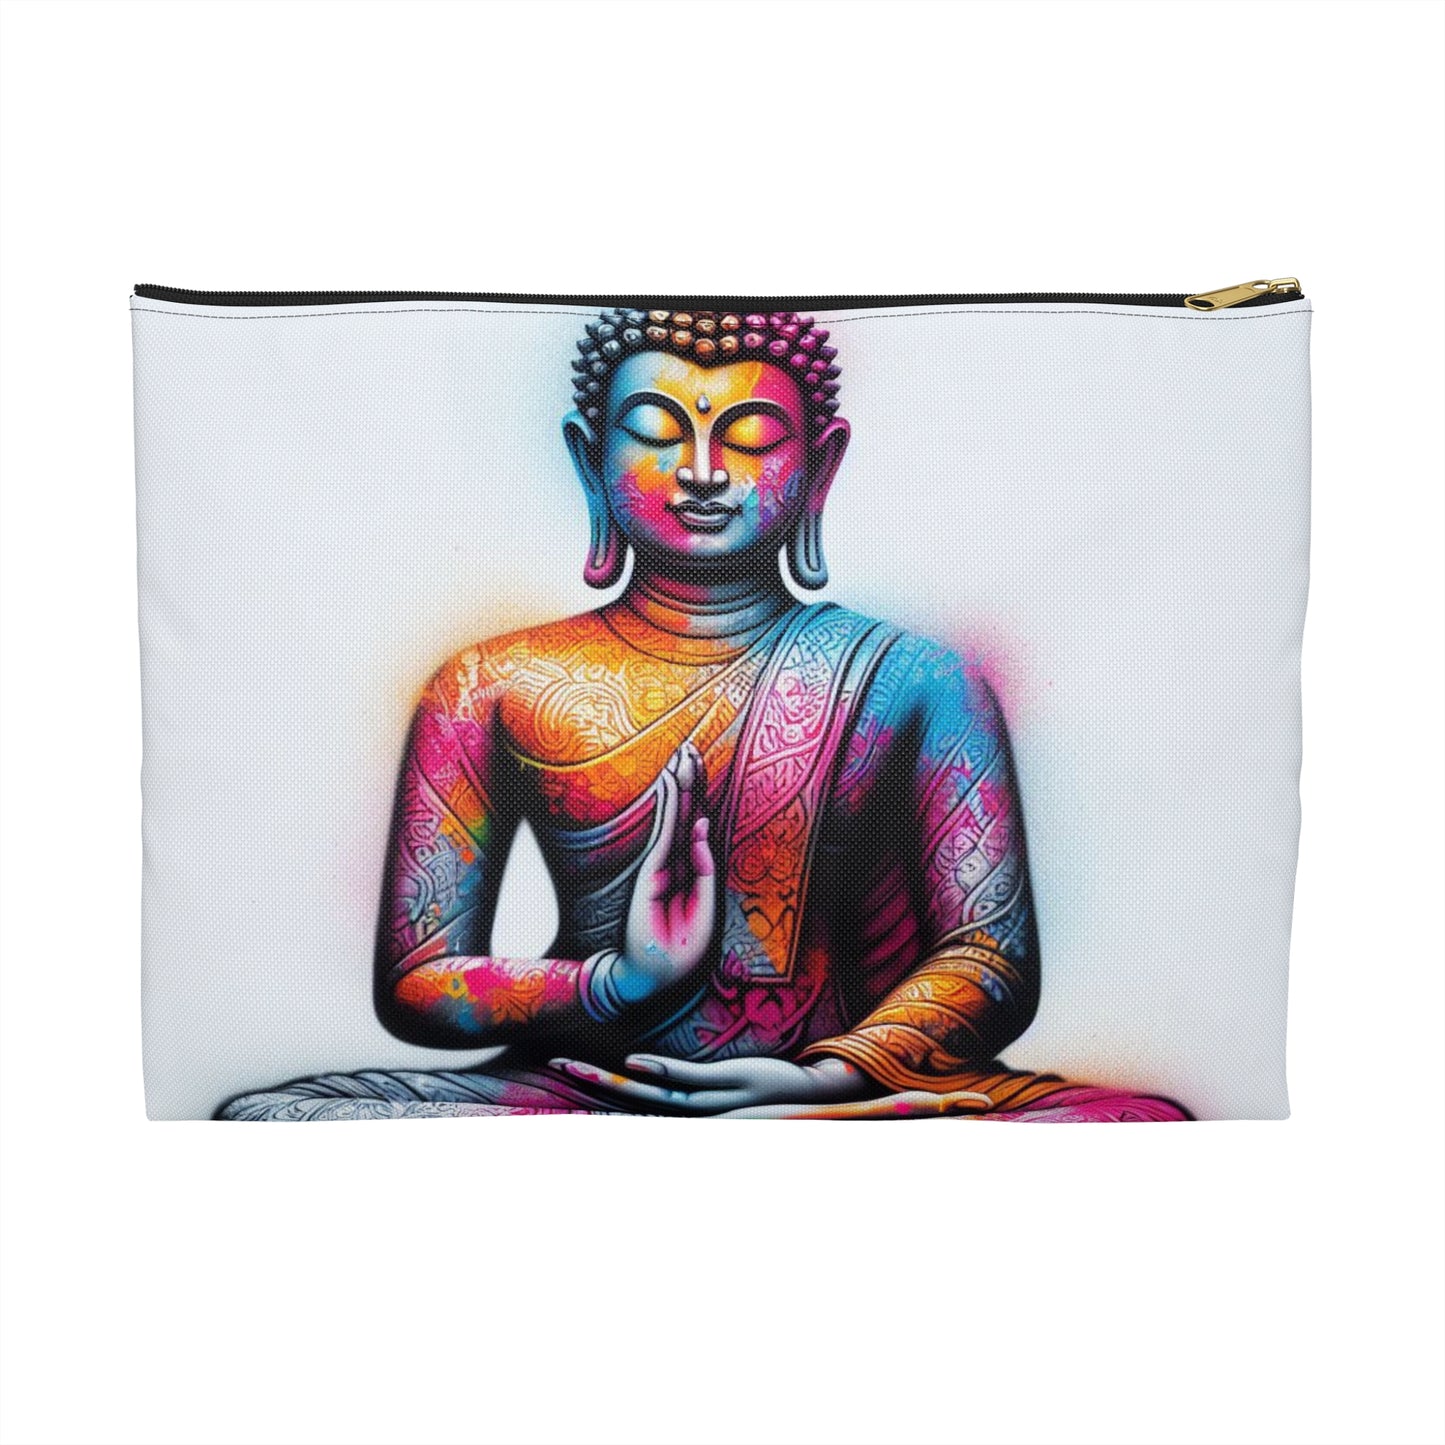 Colorful Buddha Accessory Pouch: Everyday Bag On-the-go Items